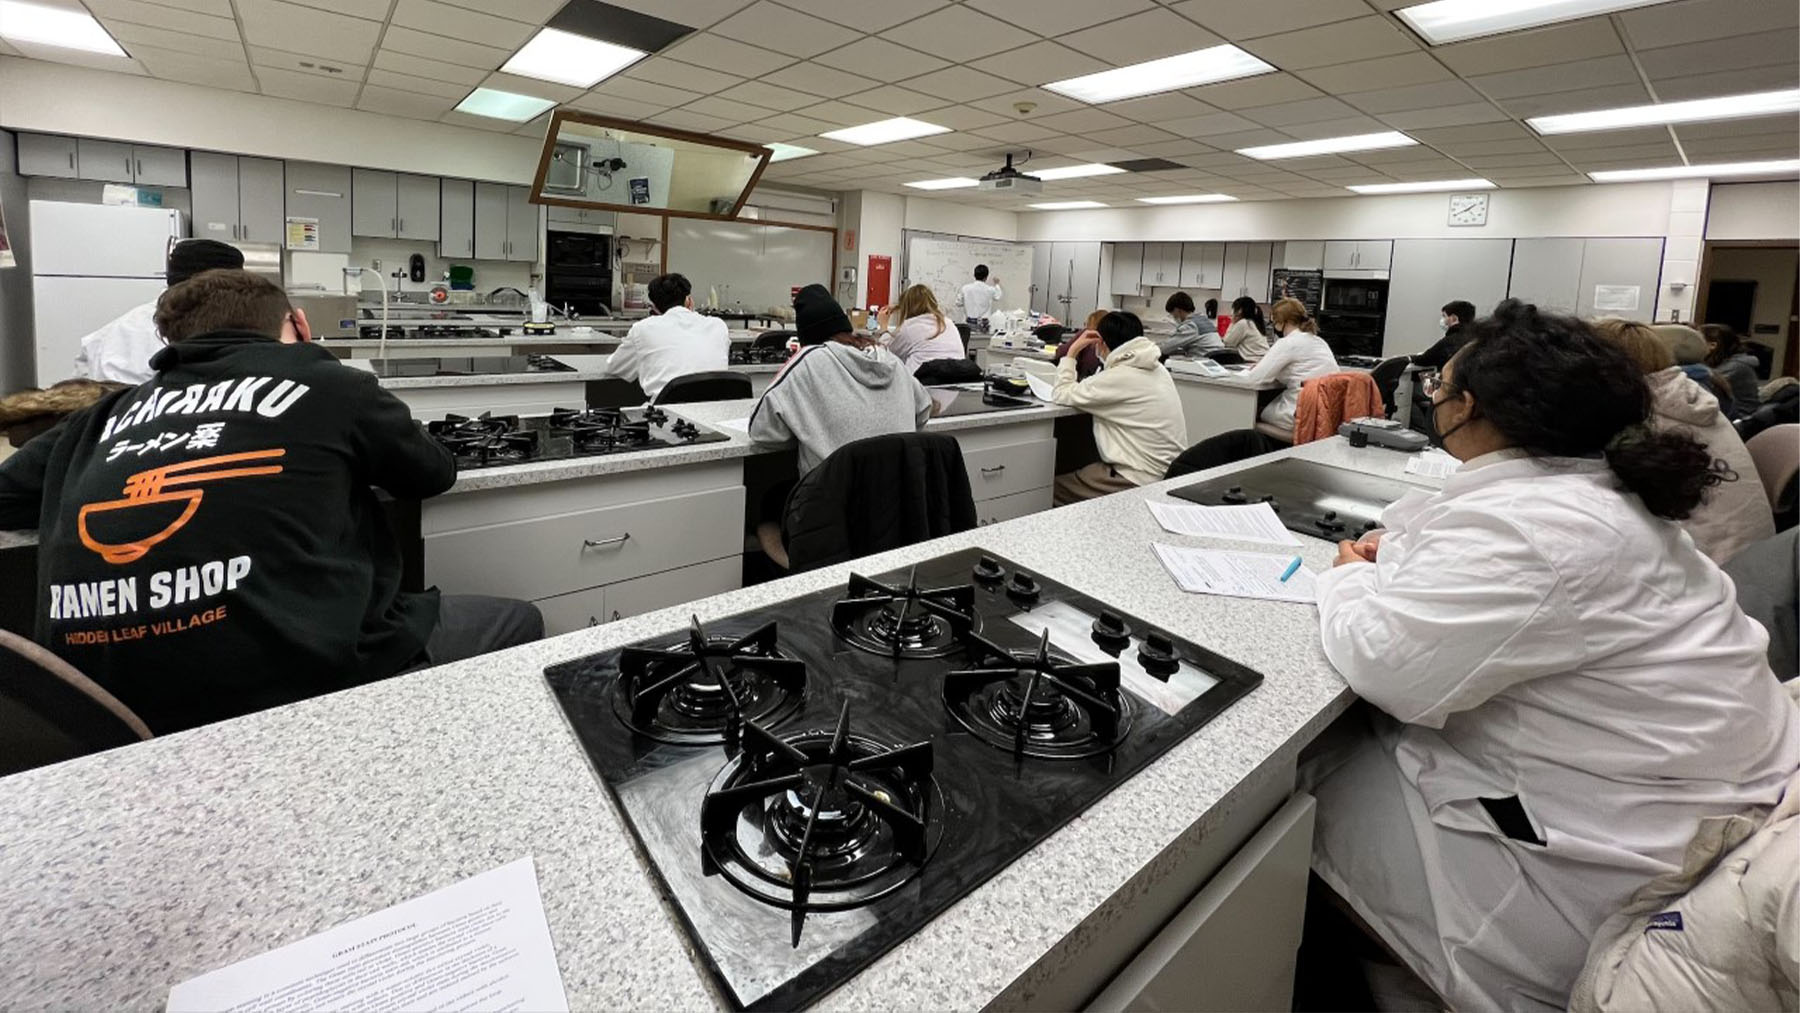 Students in the Food Science Lab